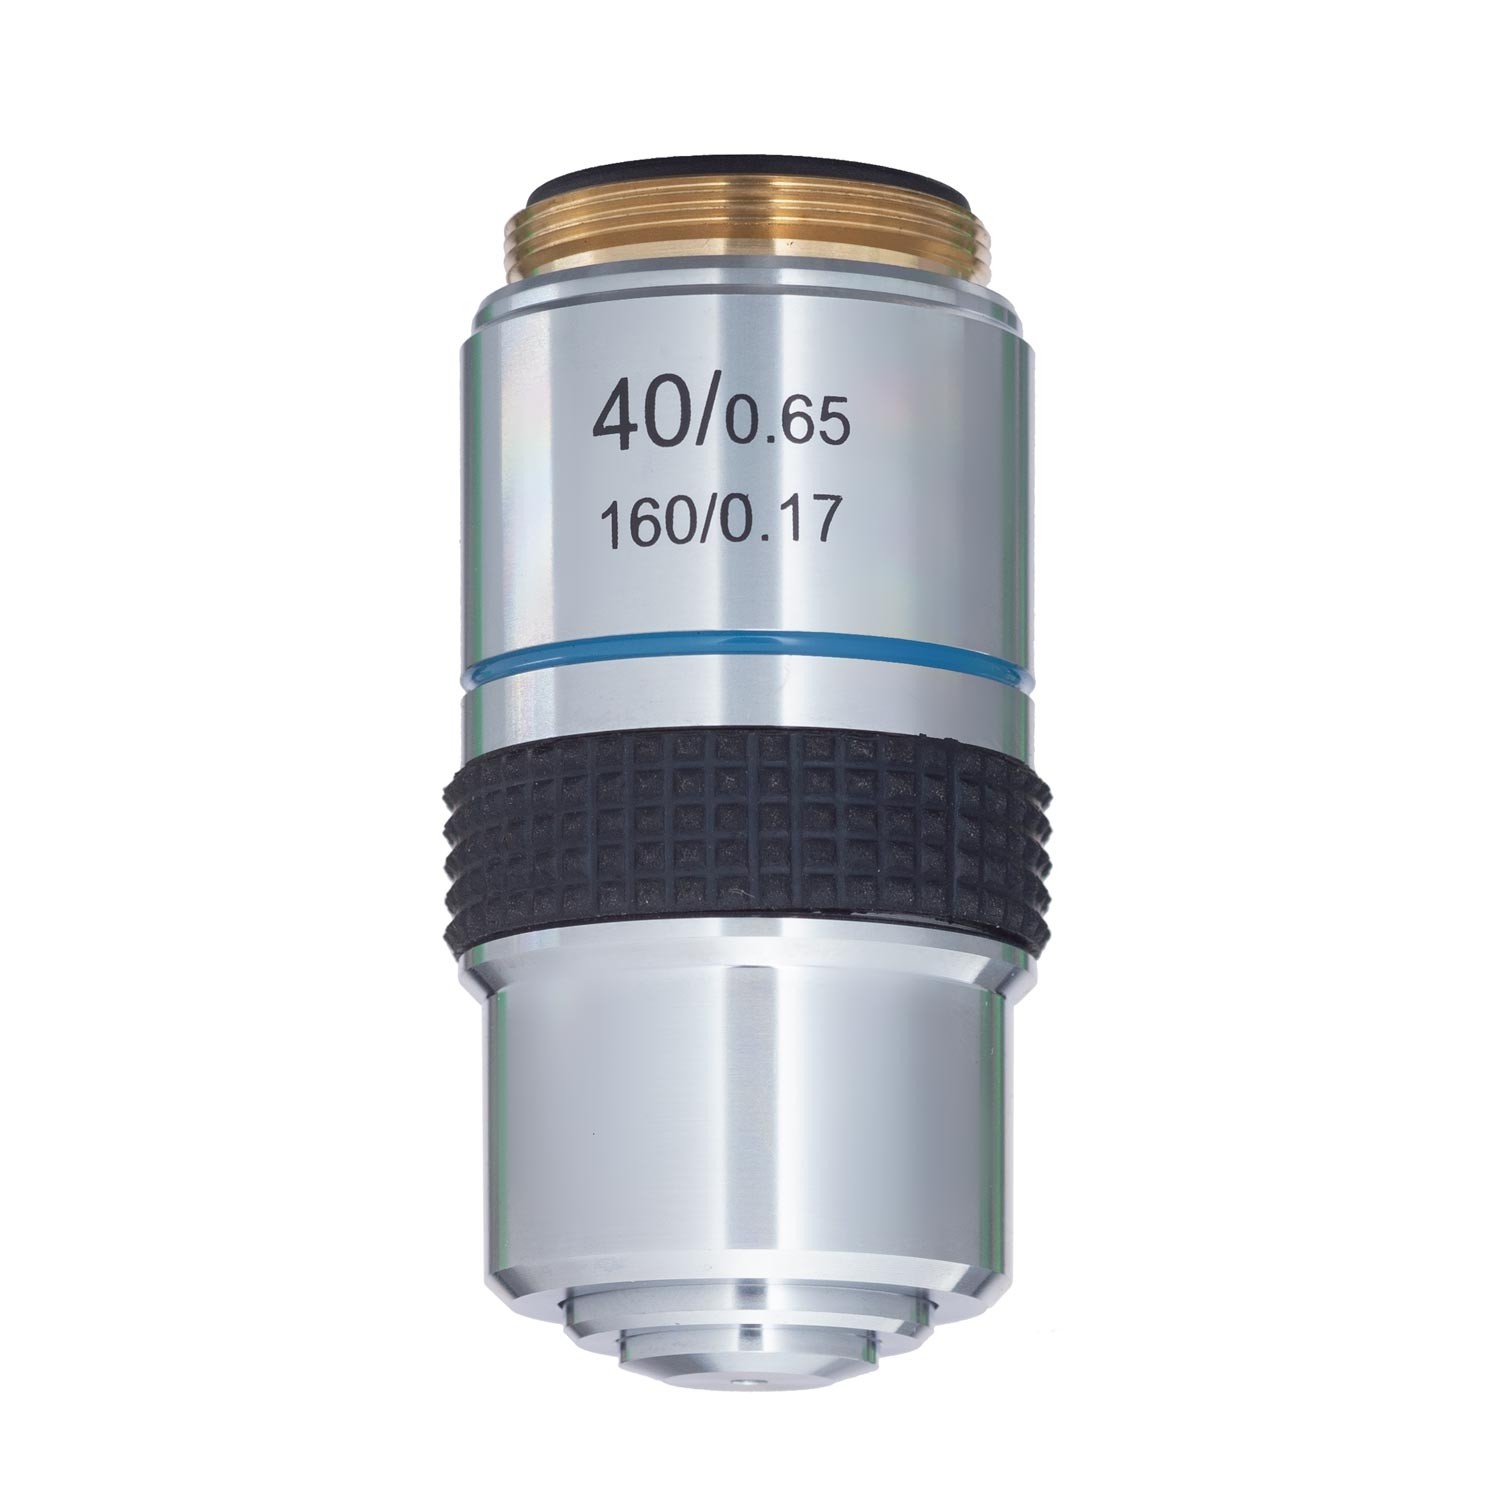 20X Achromatic Objective Lens for Compound Microscopes